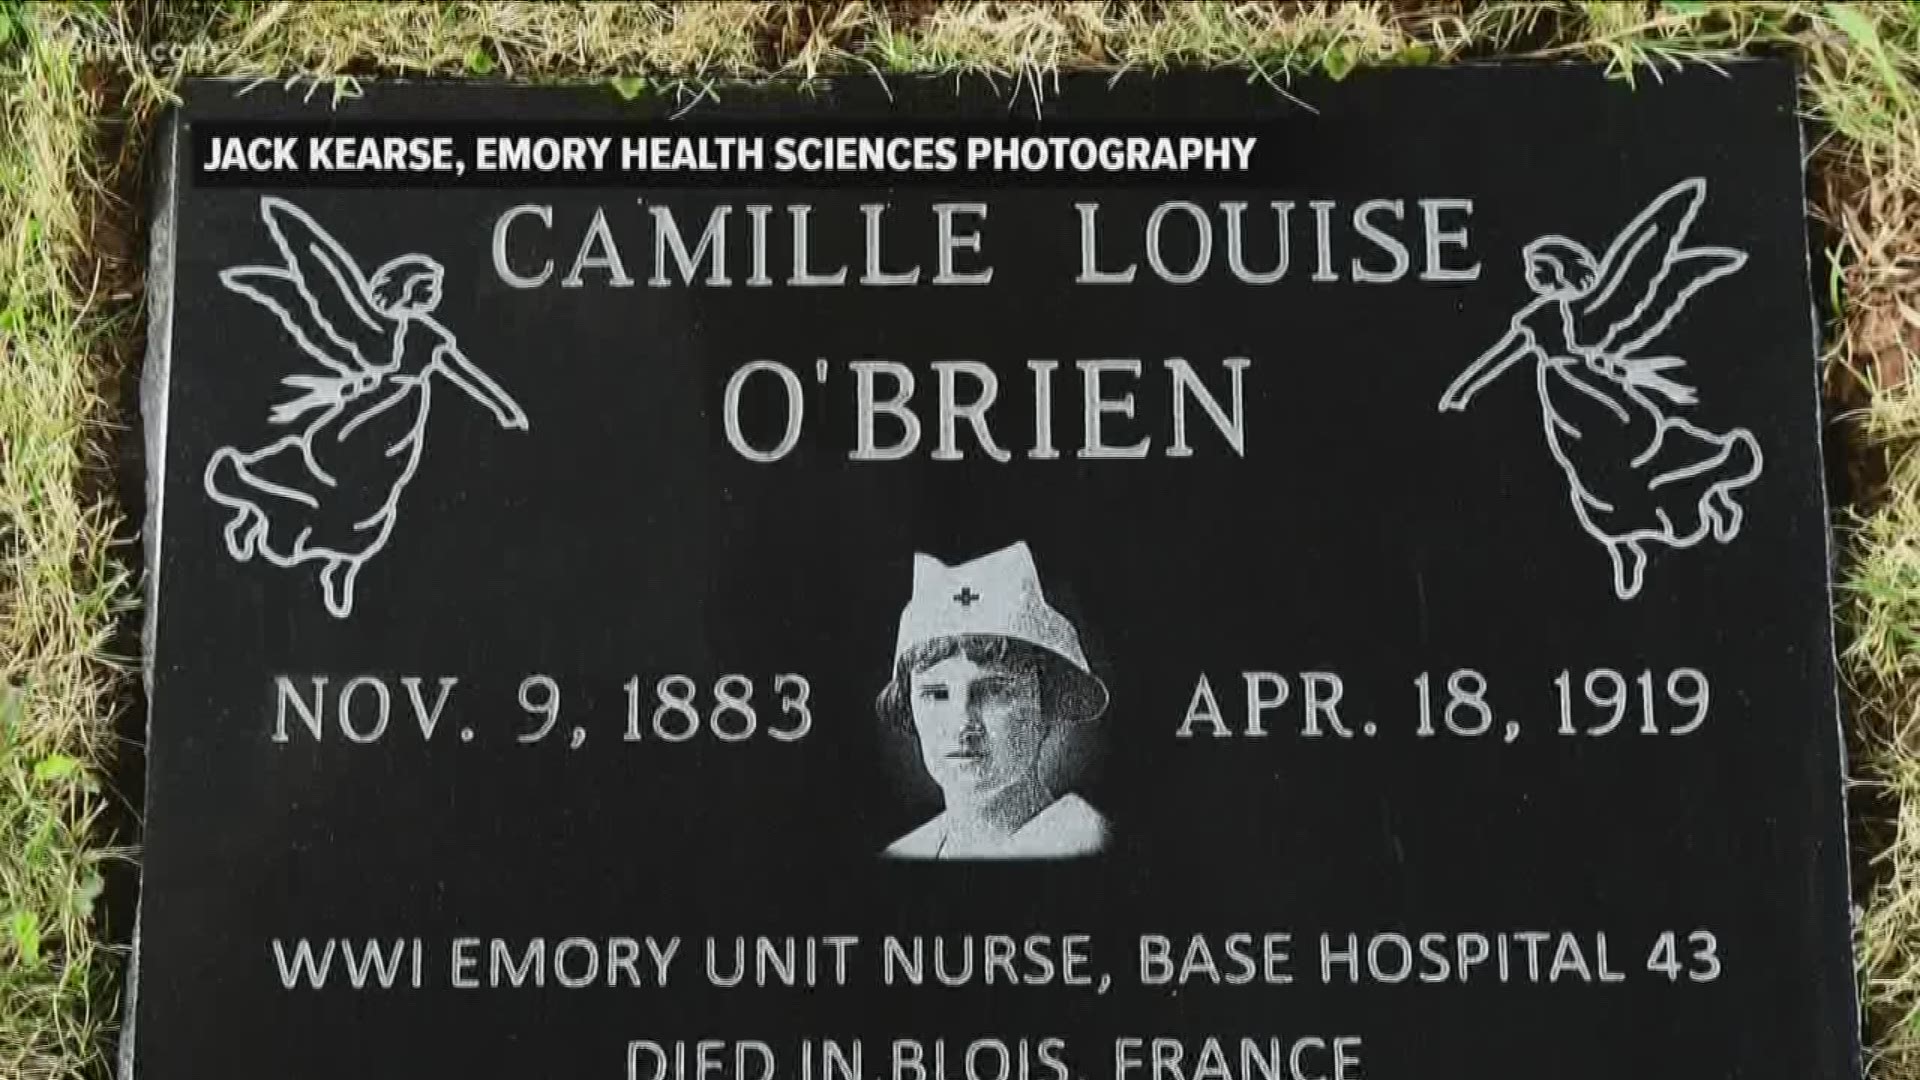 Camielle O'Brien was treating soldiers in France when she died in 1919.